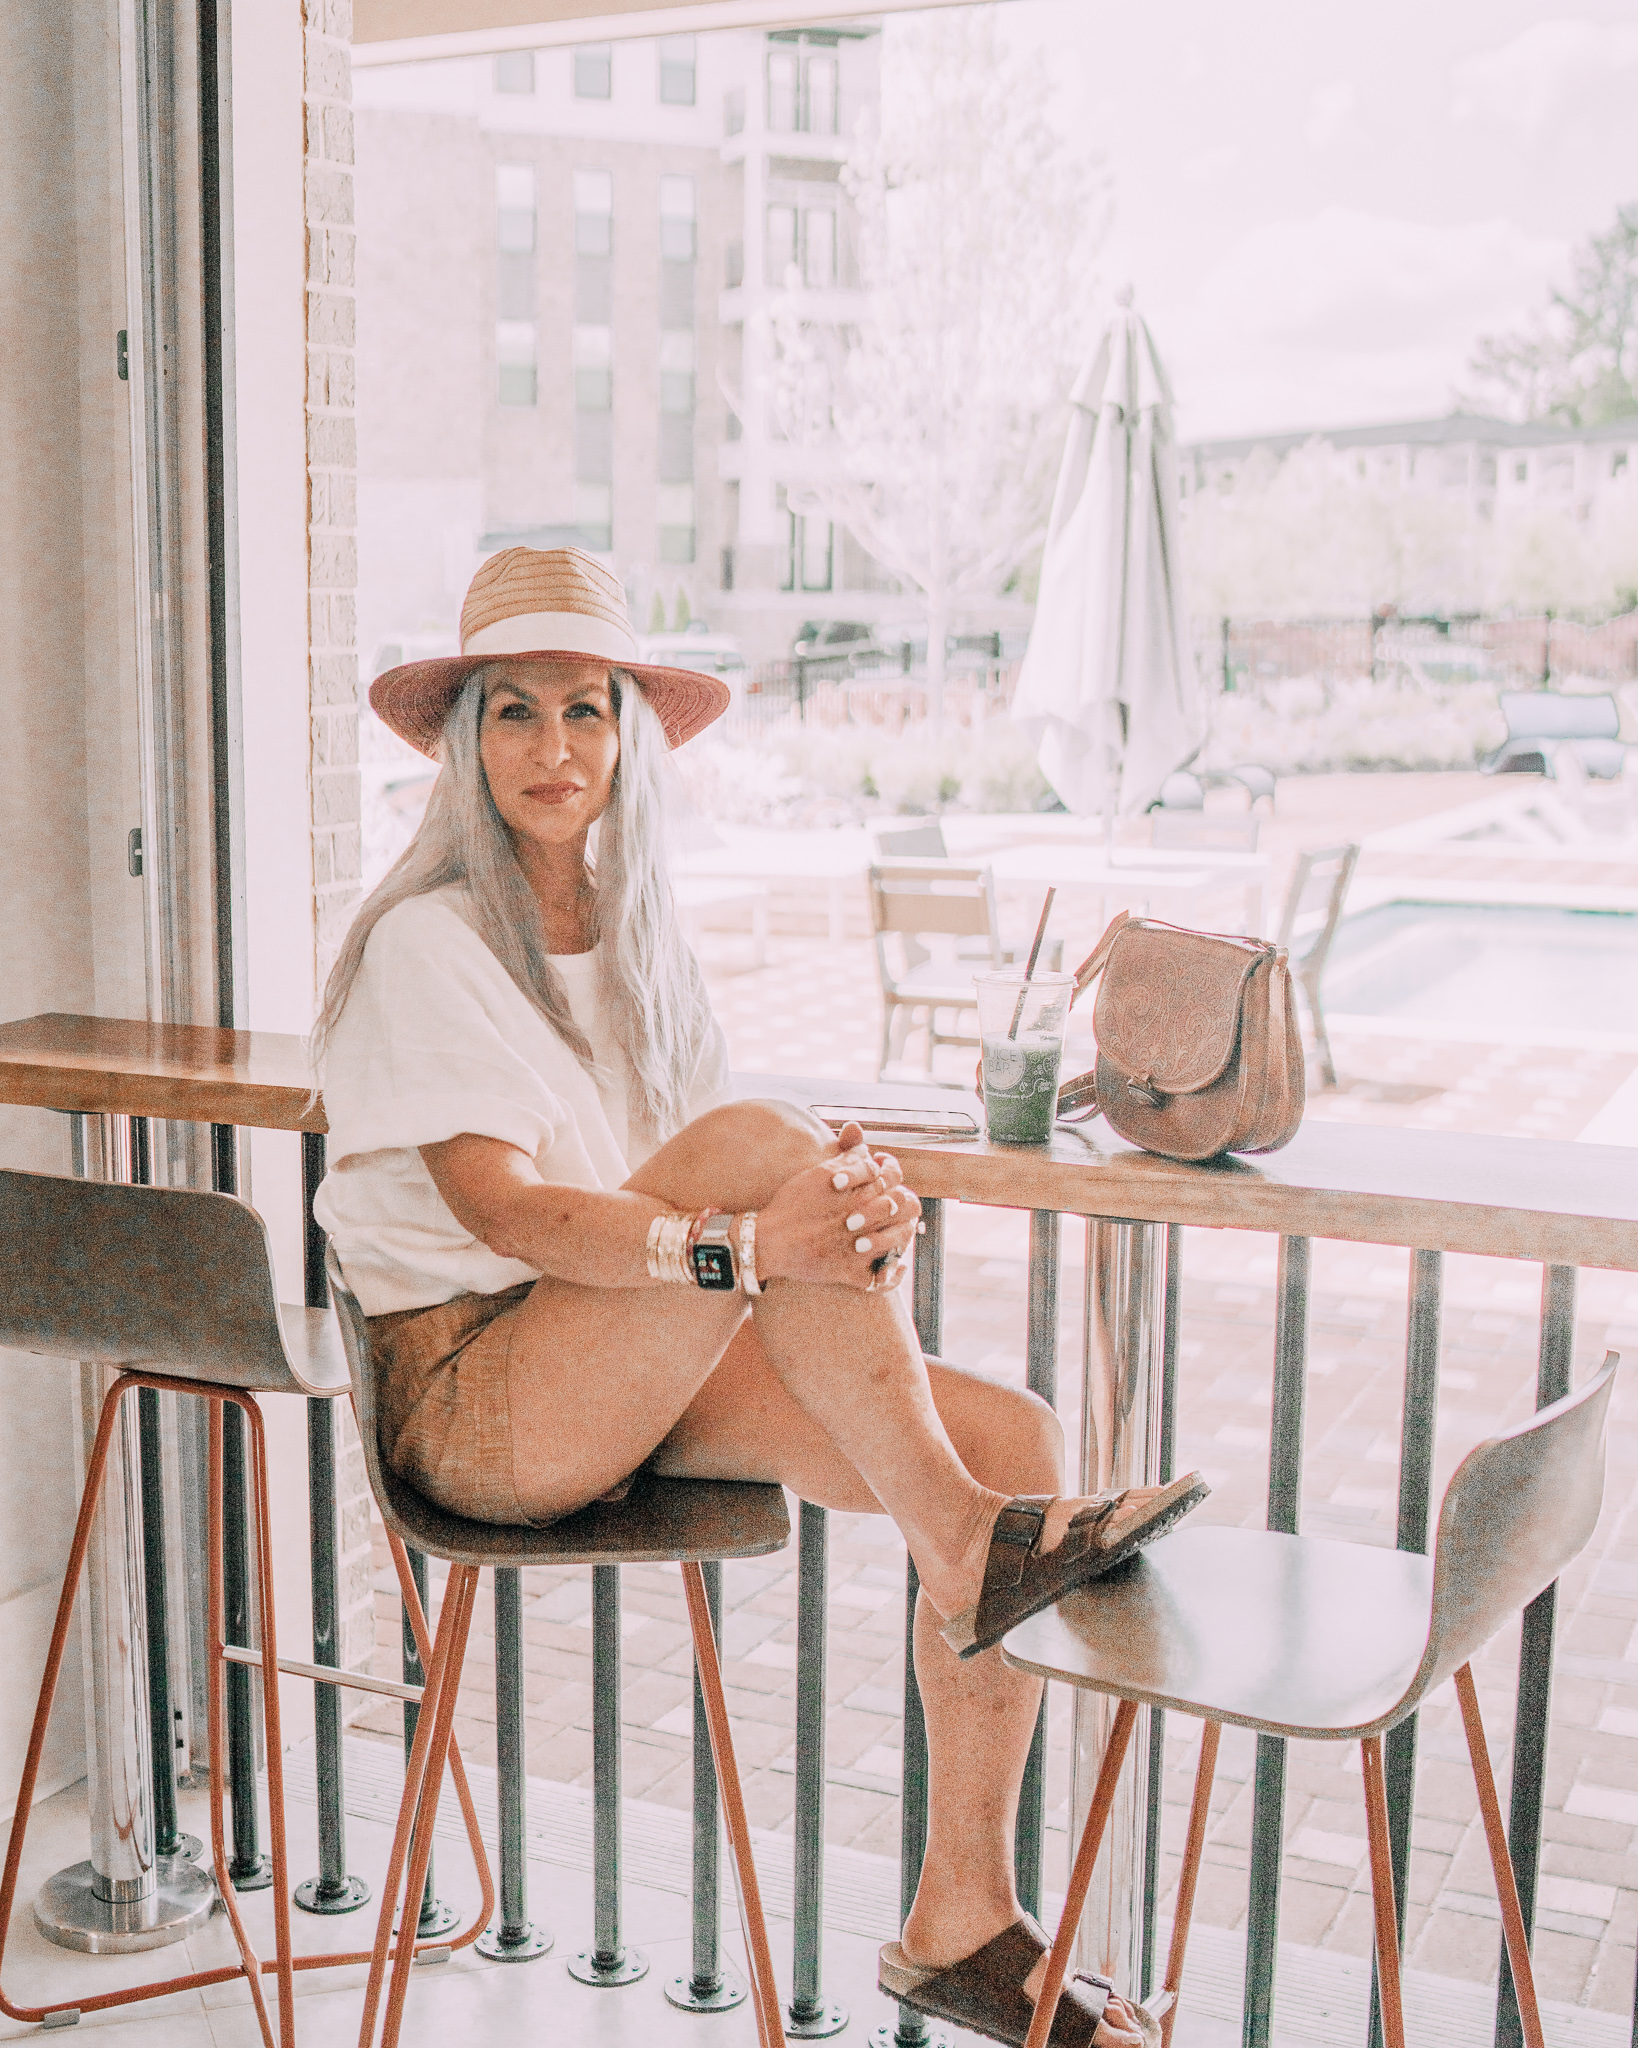 Lisa wearing a straw brim hat and white shirt and linen shorts from Athleta. Also birkenstocks and a brown leather purse